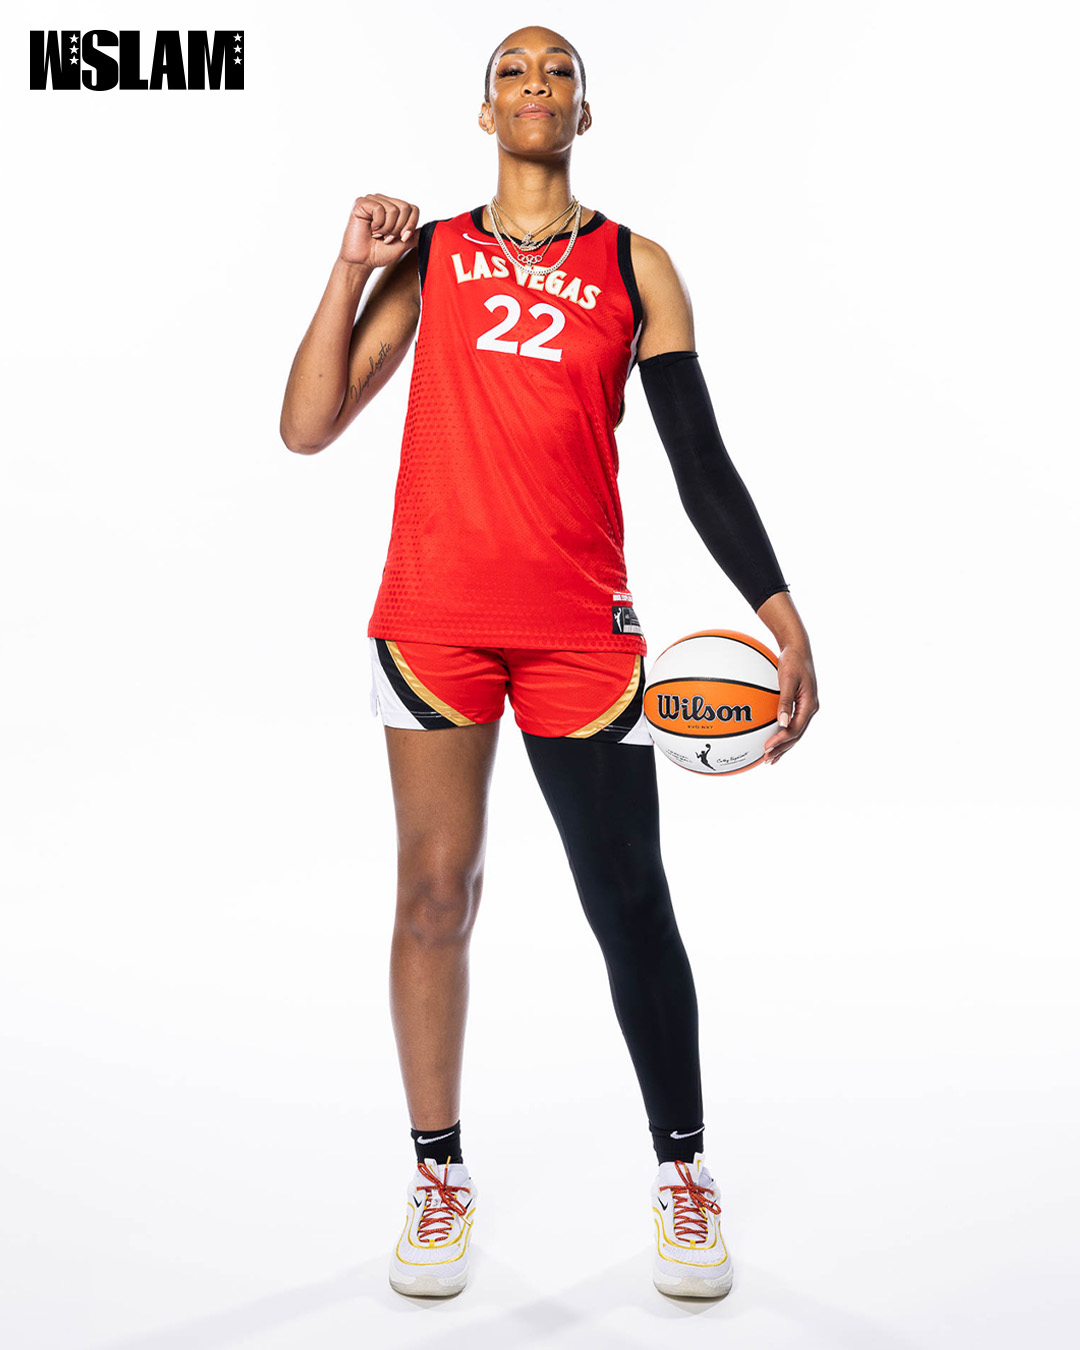 Aces Superstars A’ja Wilson, Kelsey Plum, Chelsea Gray and Jackie Young Open Up on How They’ve Built a Powerhouse in Vegas